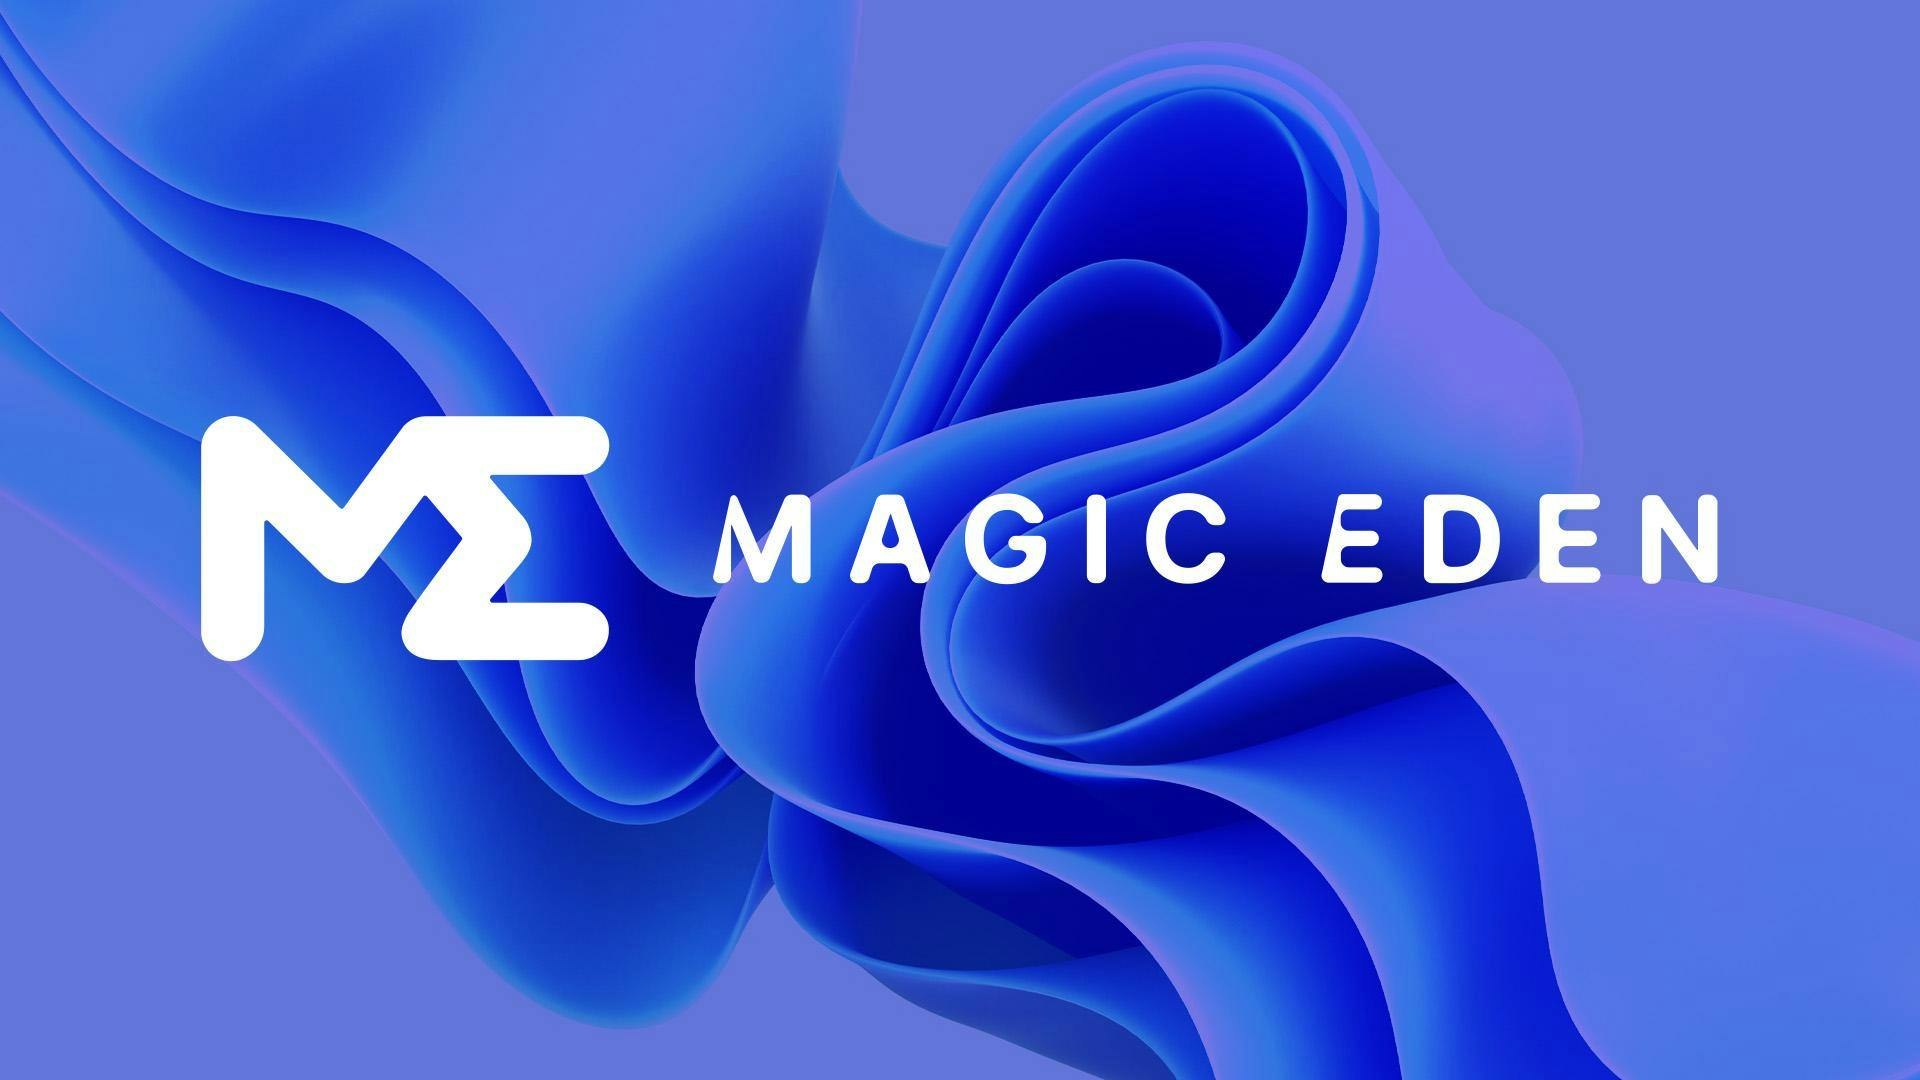 Magic Eden Leads NFT Market with 80.58% Share, Native to Solana